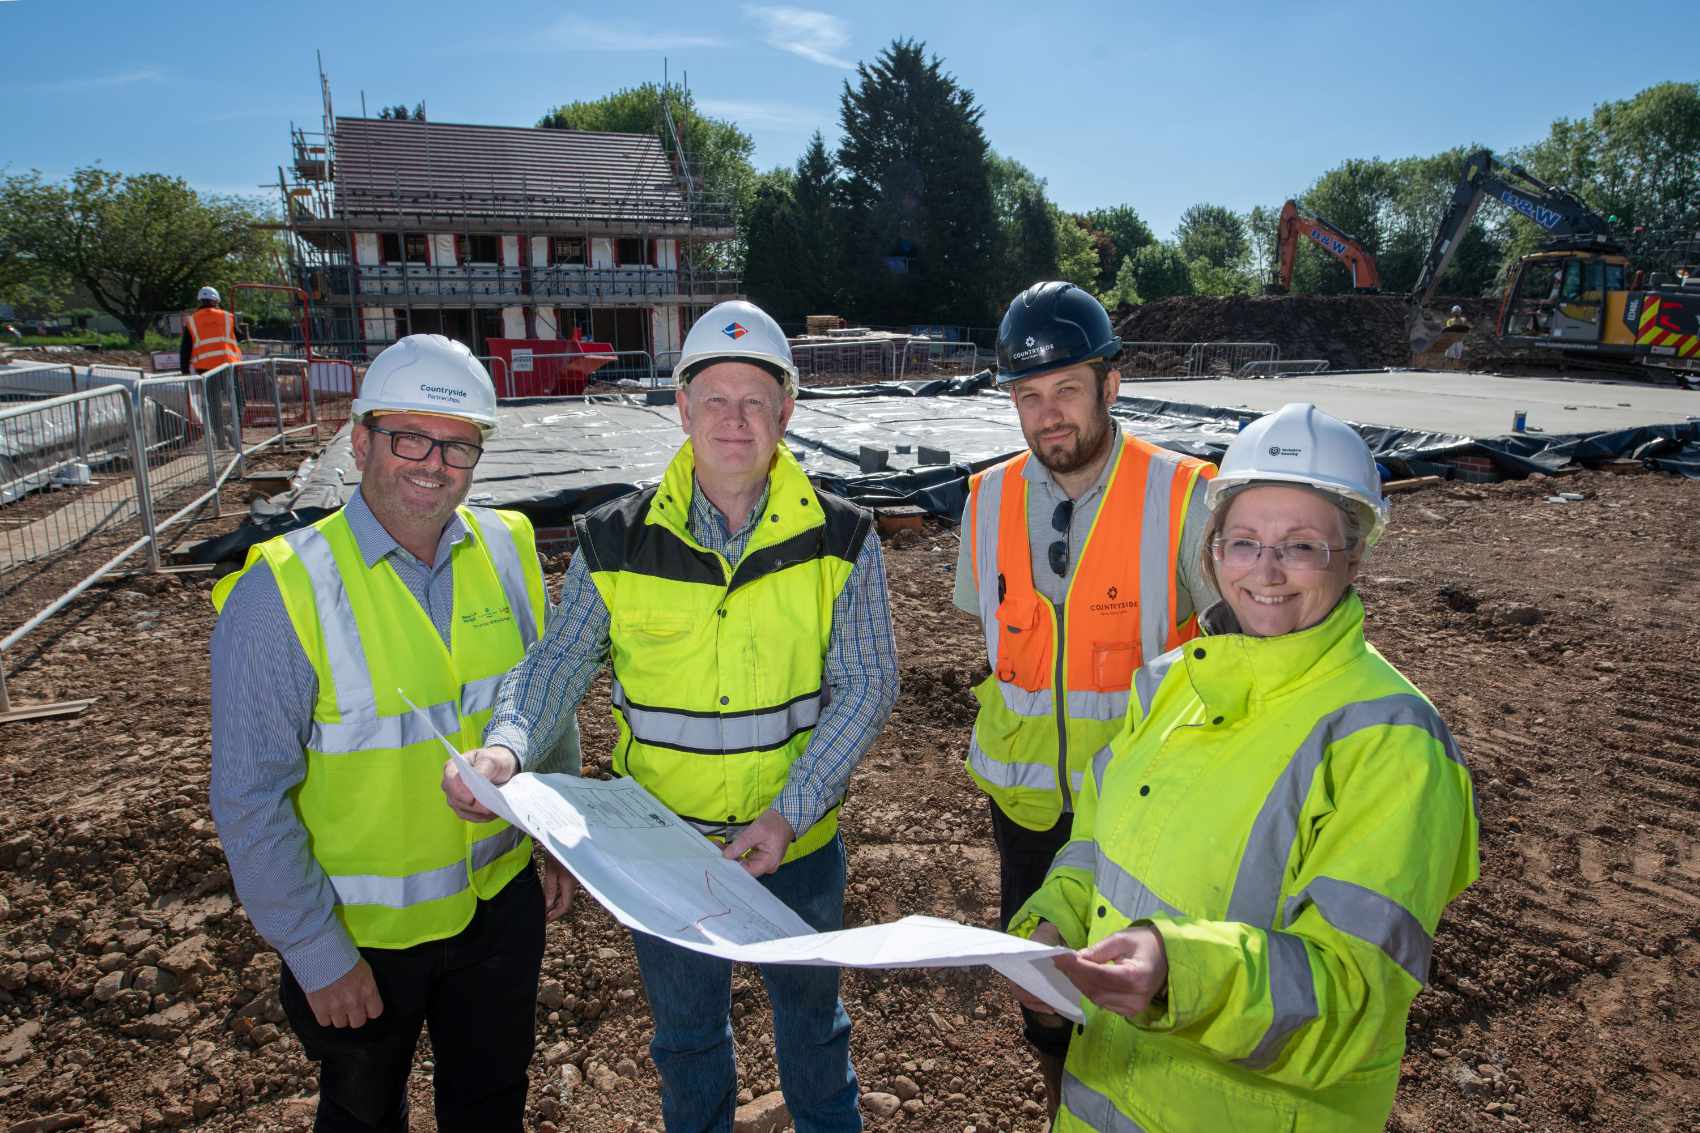 (L – R) Stuart La-Ffin of Countrywide Projects, David Blakey of Summers-Inman, Dave Bunko, Site Manager at Countryside Partnerships and Christine Uren, Development Project Assistant at Yorkshire Housing